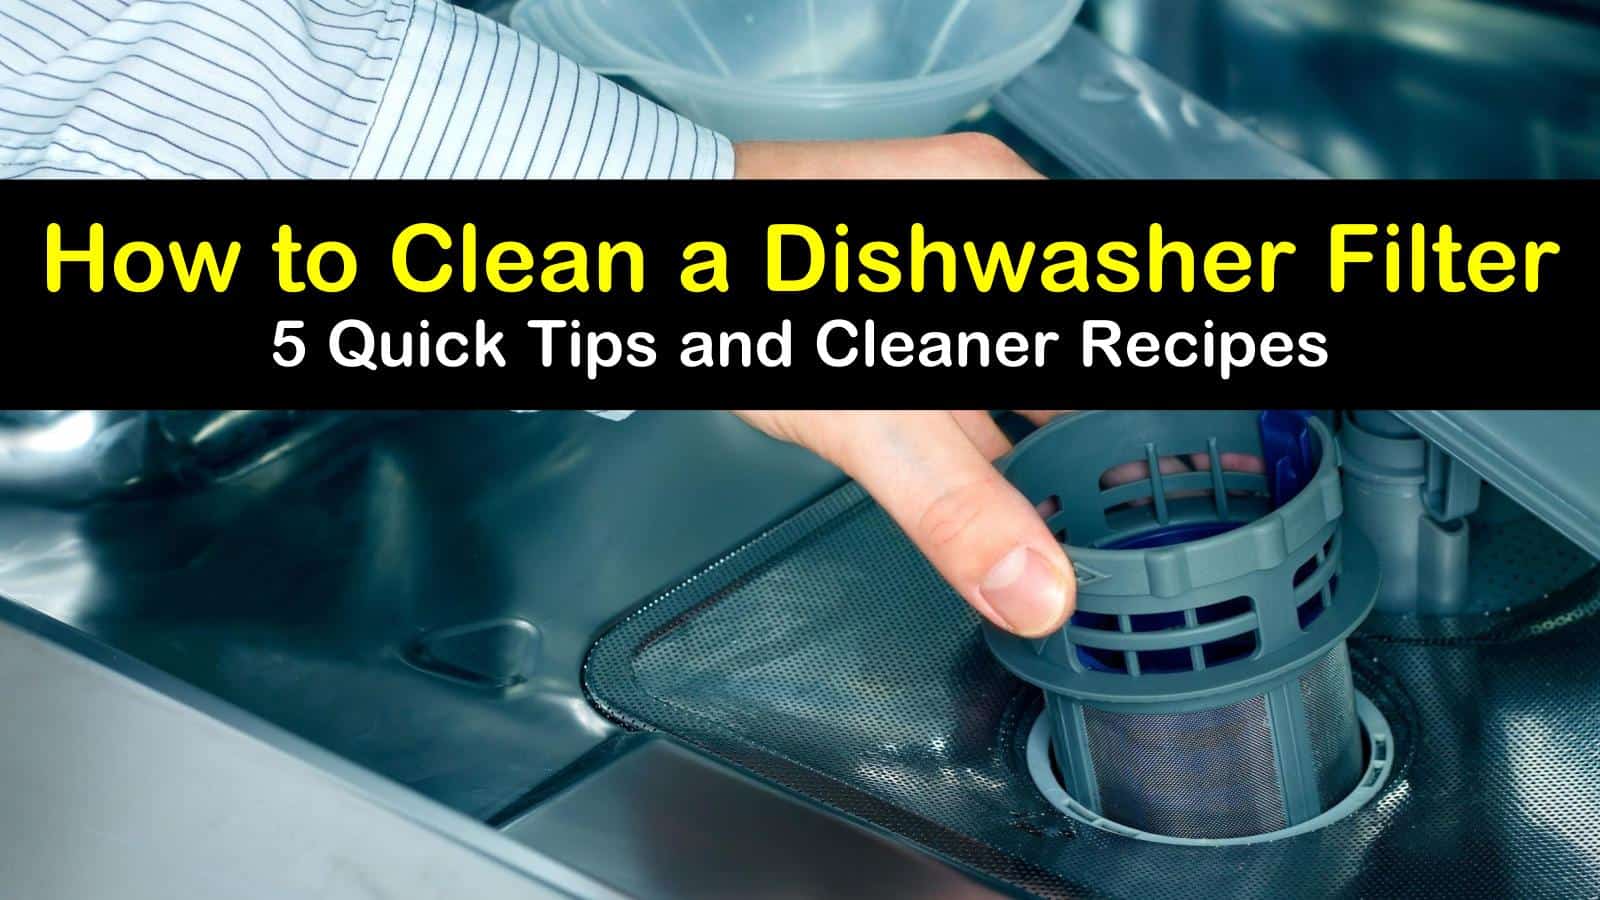 how to clean a dishwasher filter titleimg1